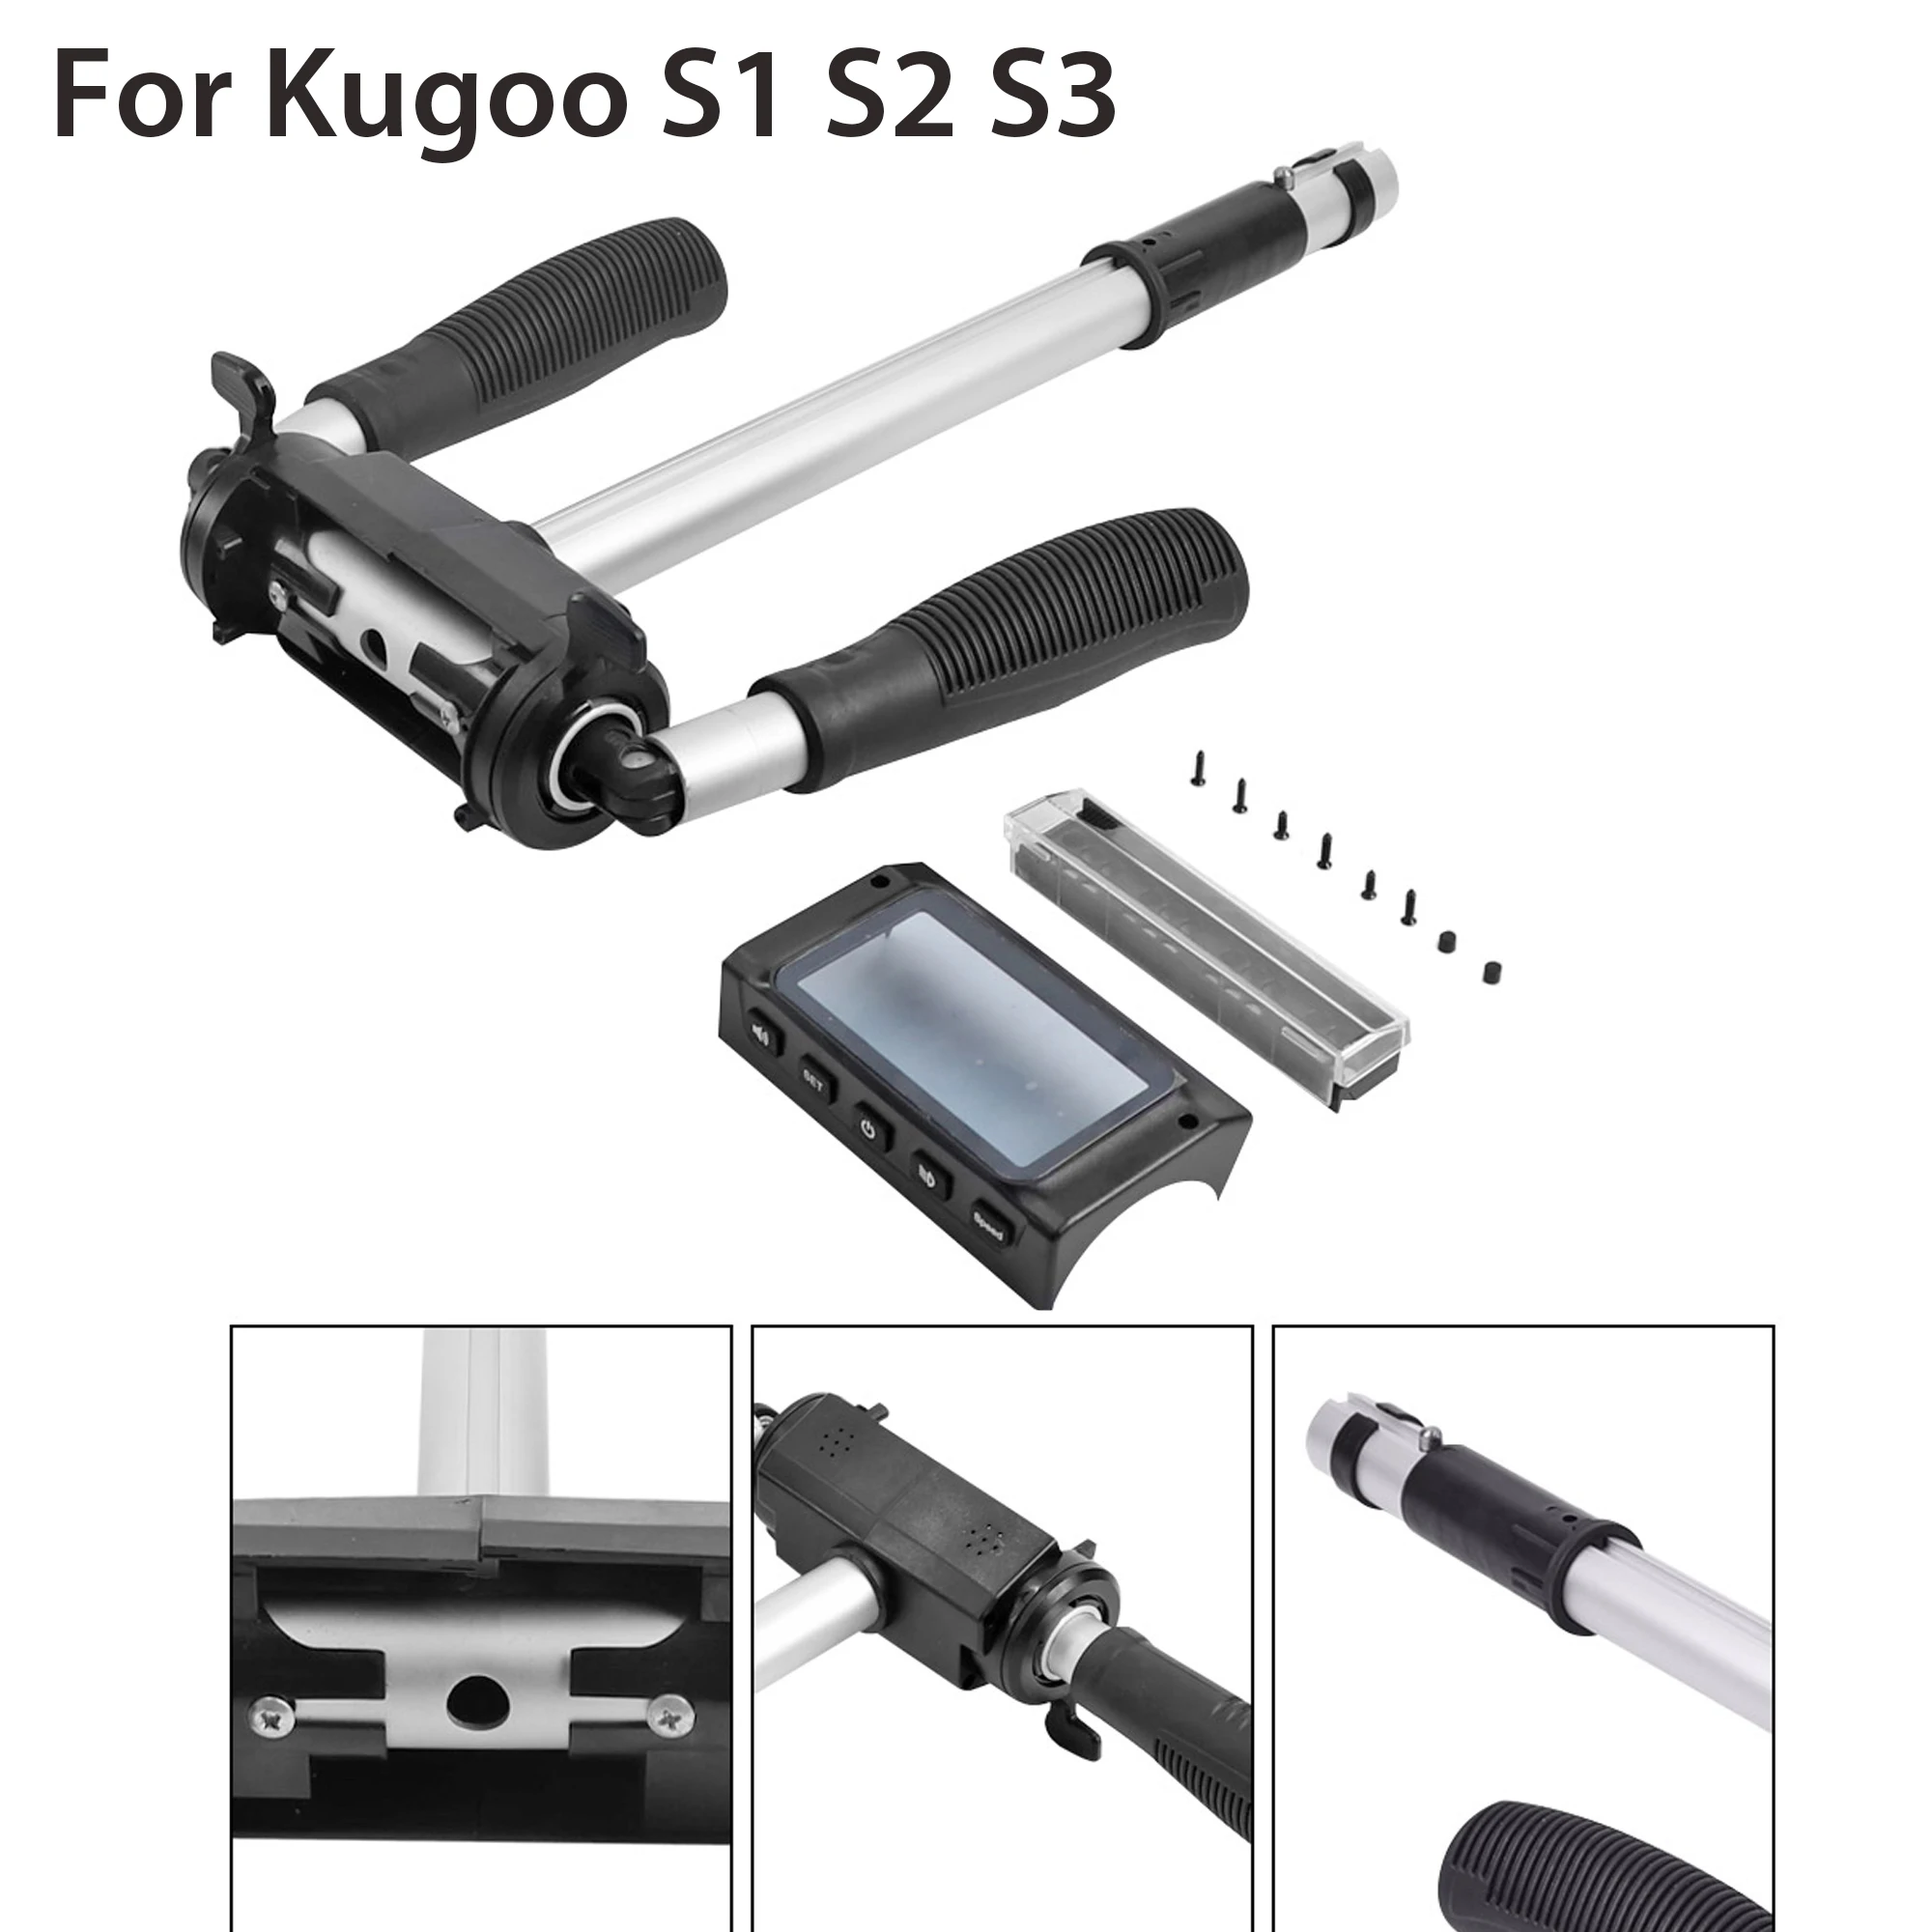 

Electric Scooter Folding Kick Scooter Handlebar Handle Grip Set For Kugoo S1 S2 S3 Kickscooter T-bar Faucet Set Accessory 8 Inch